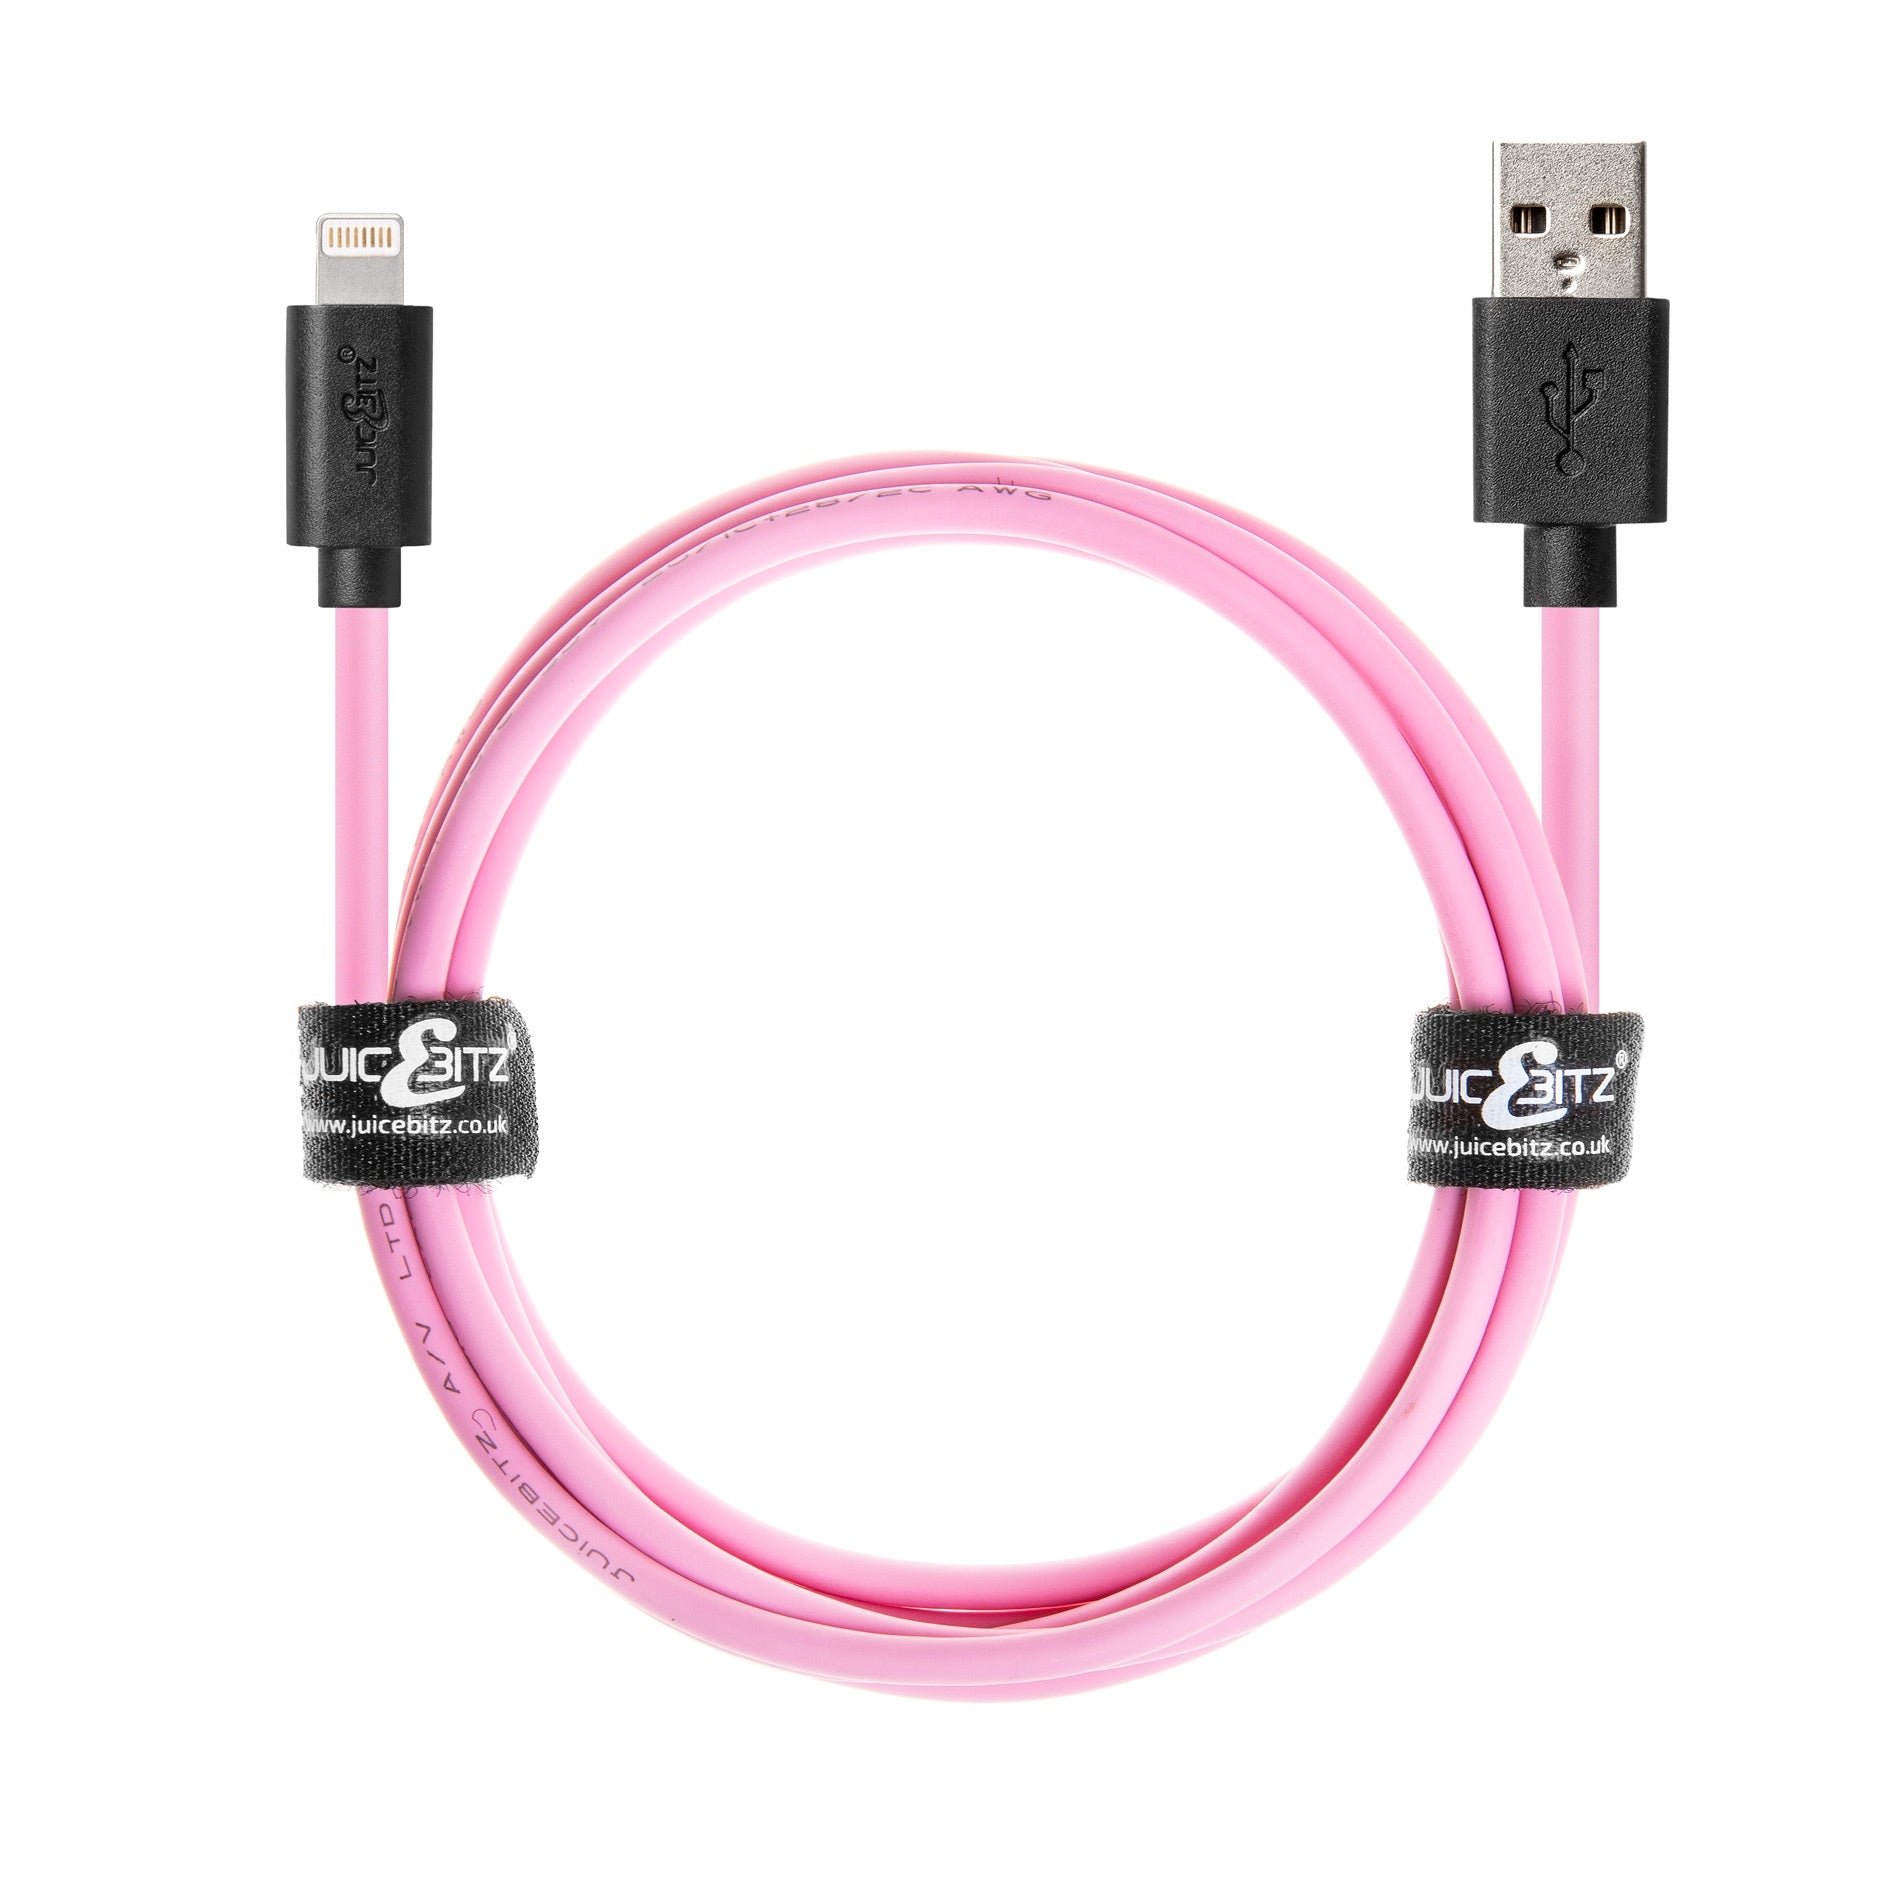 USB Charger Cable Data Sync Lead for iPhone, iPad, iPod - Pink